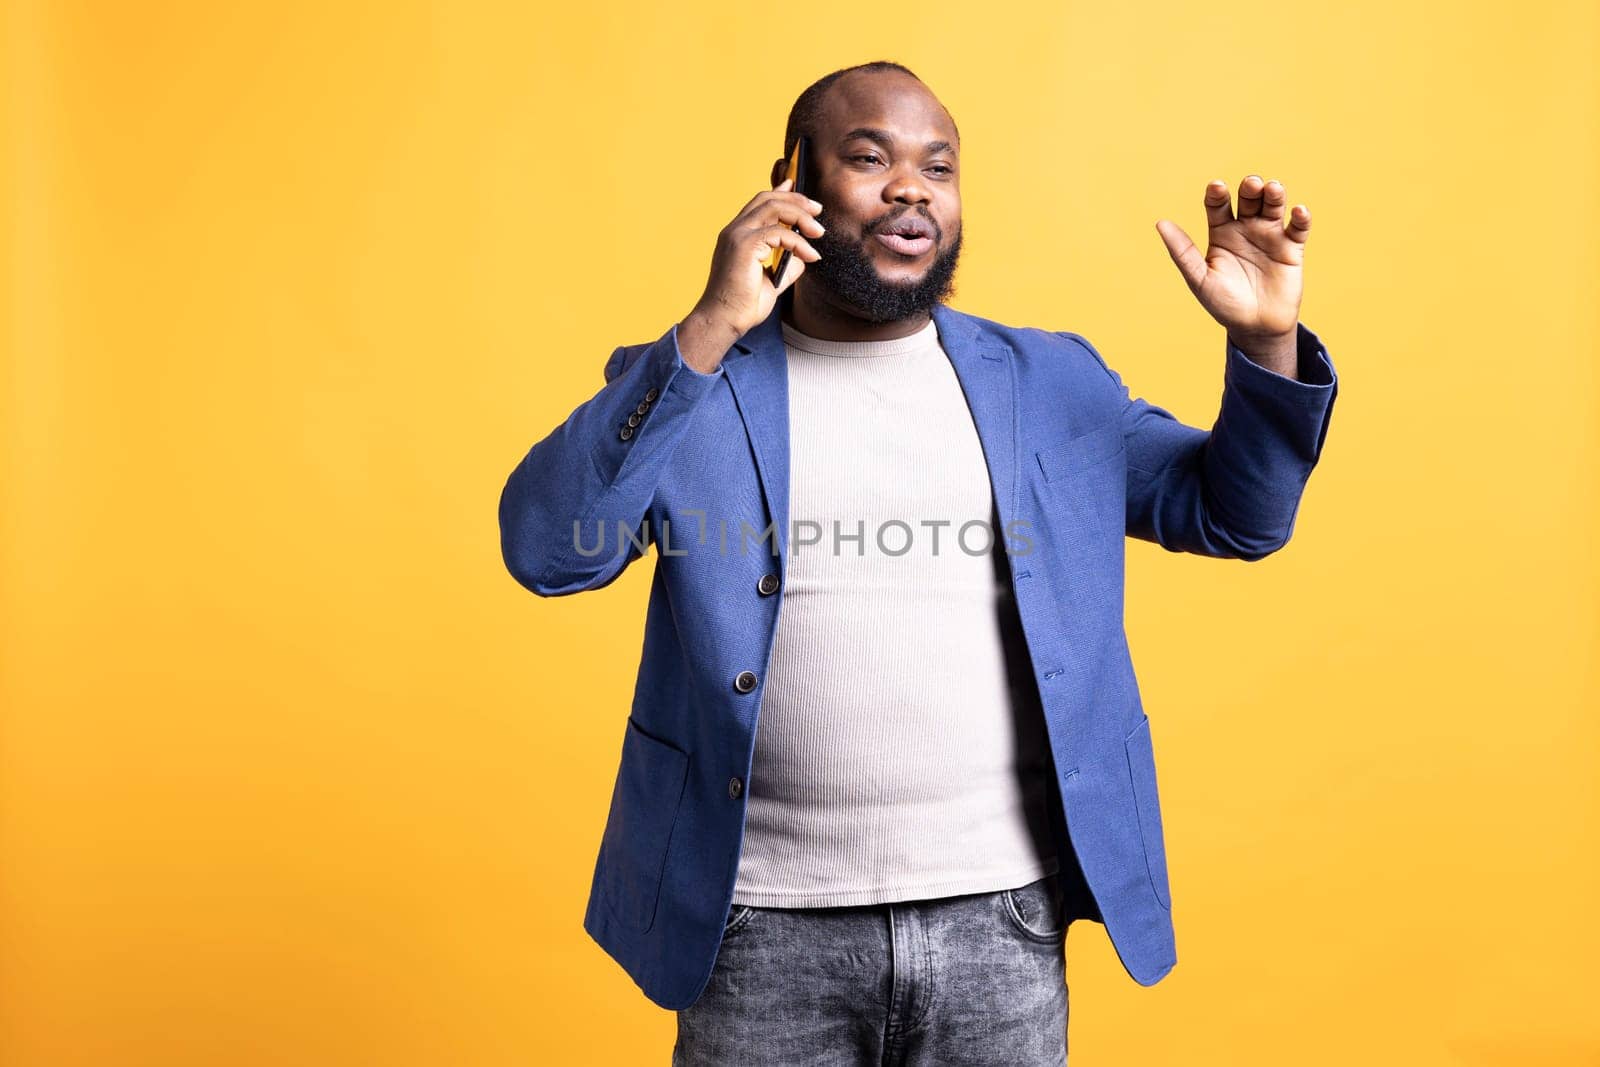 Joyous man with positive emotion, enjoying talking with friends phone call using smartphone, studio background. Happy person with smile on face, receiving good news during telephone call